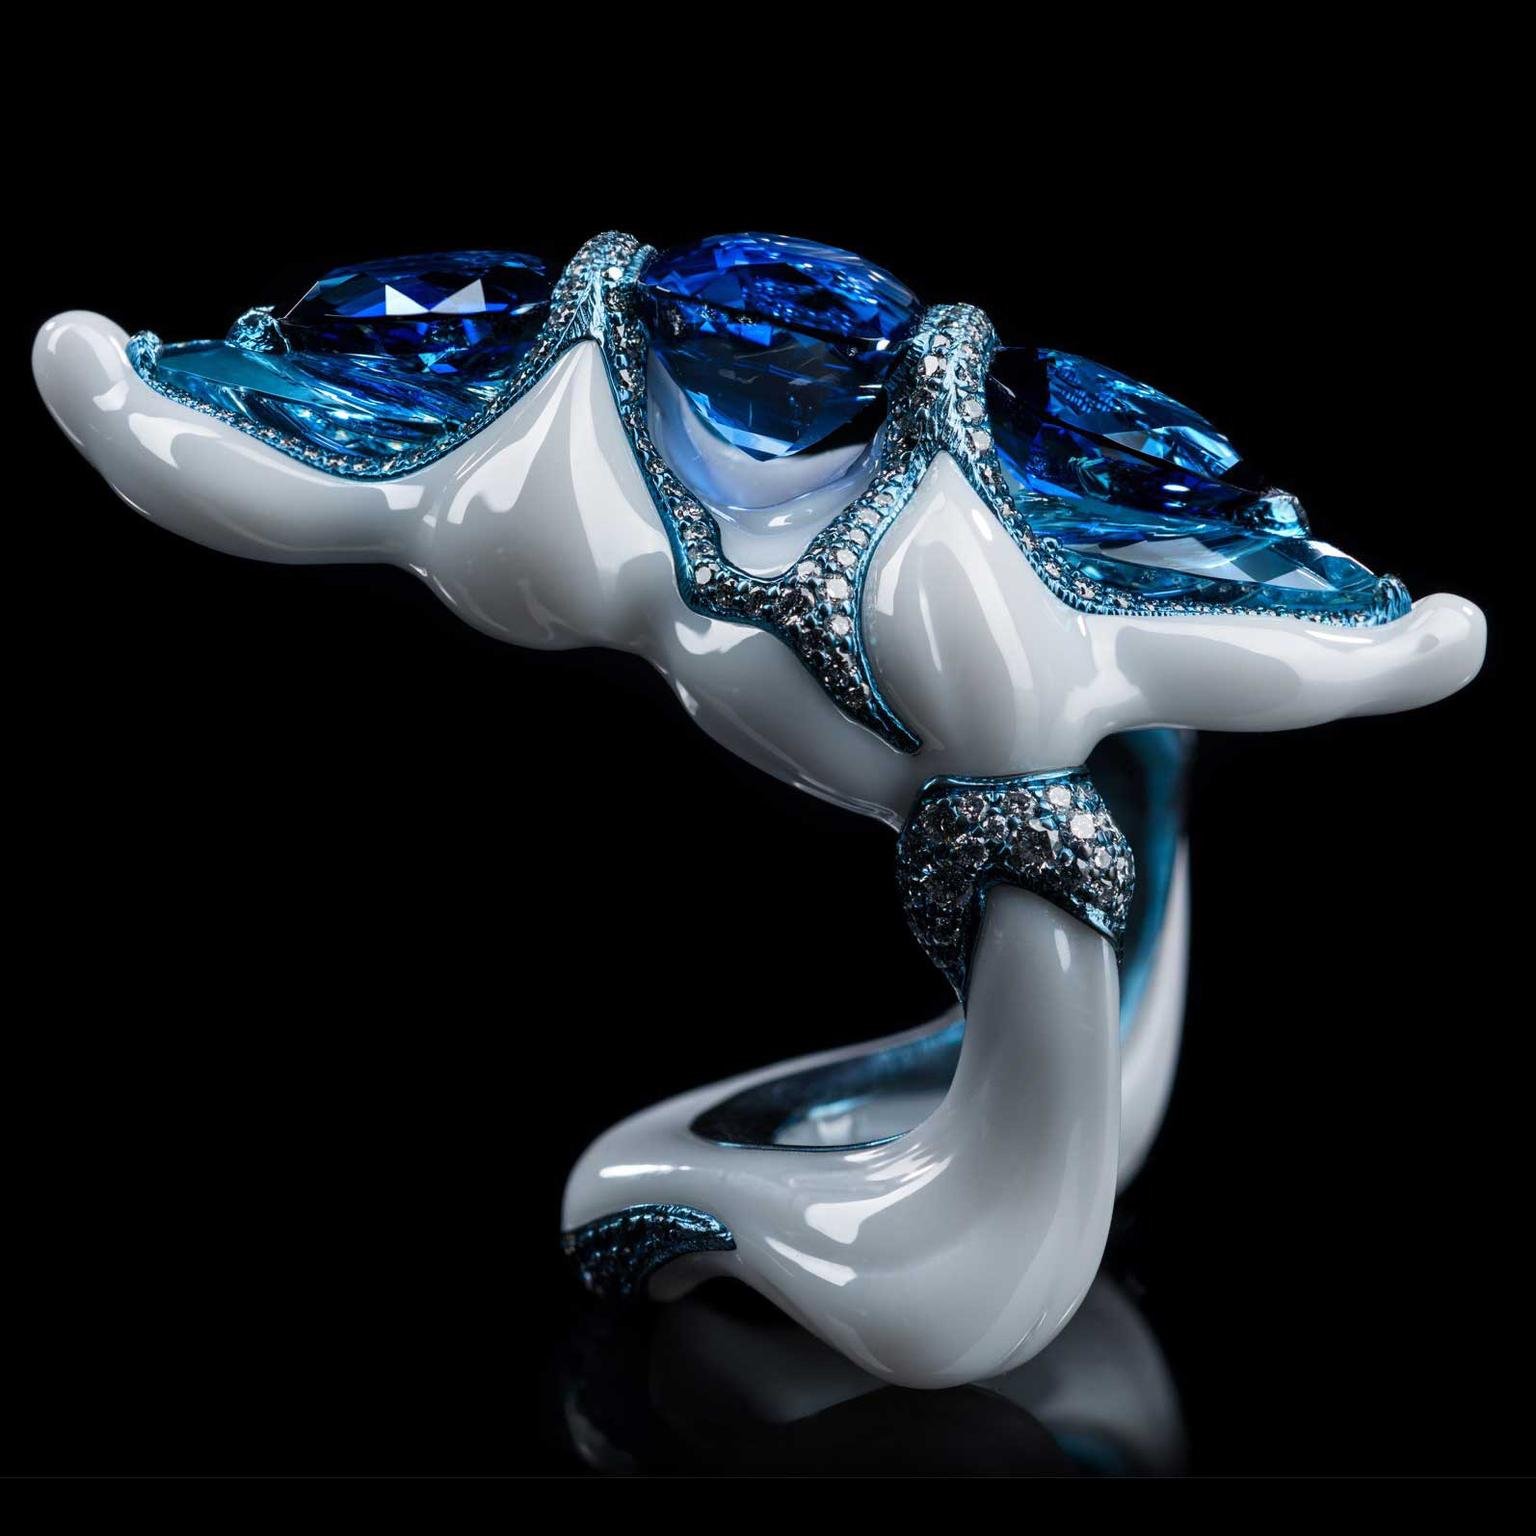 wallace-chan-a-new-generation-ring-porcelain-sapphire-and-titanium.jpg__1536x0_q75_crop-scale_subsampling-2_upscale-false